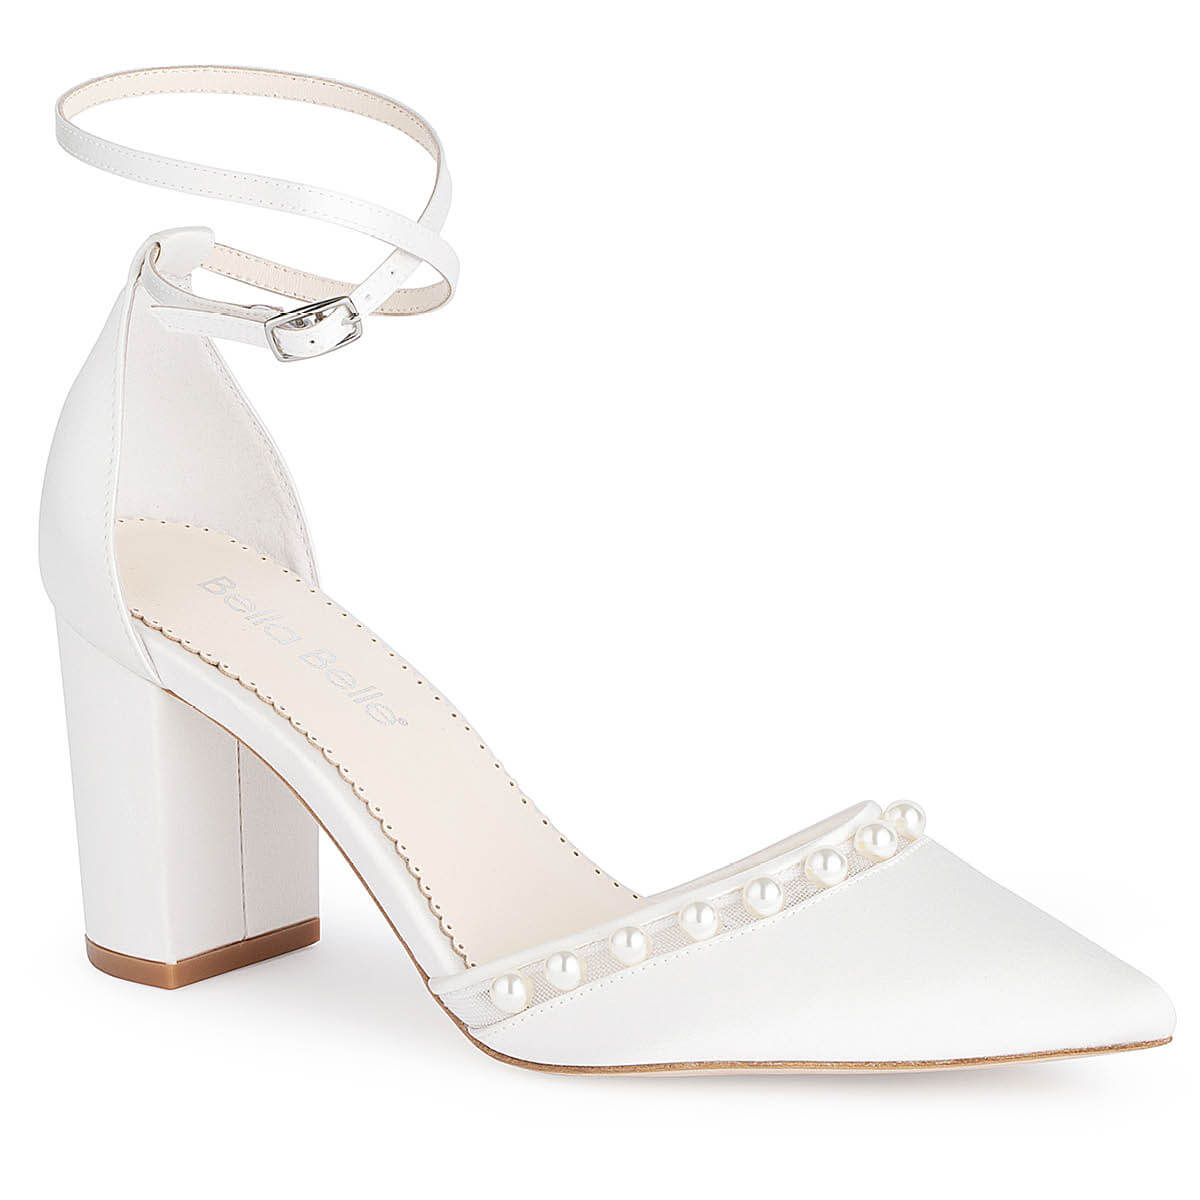 Ivory Satin Block Heel with Pearls Ankle Strap - Women Shoes, Wedding Shoes,  Bridesmaids Shoes